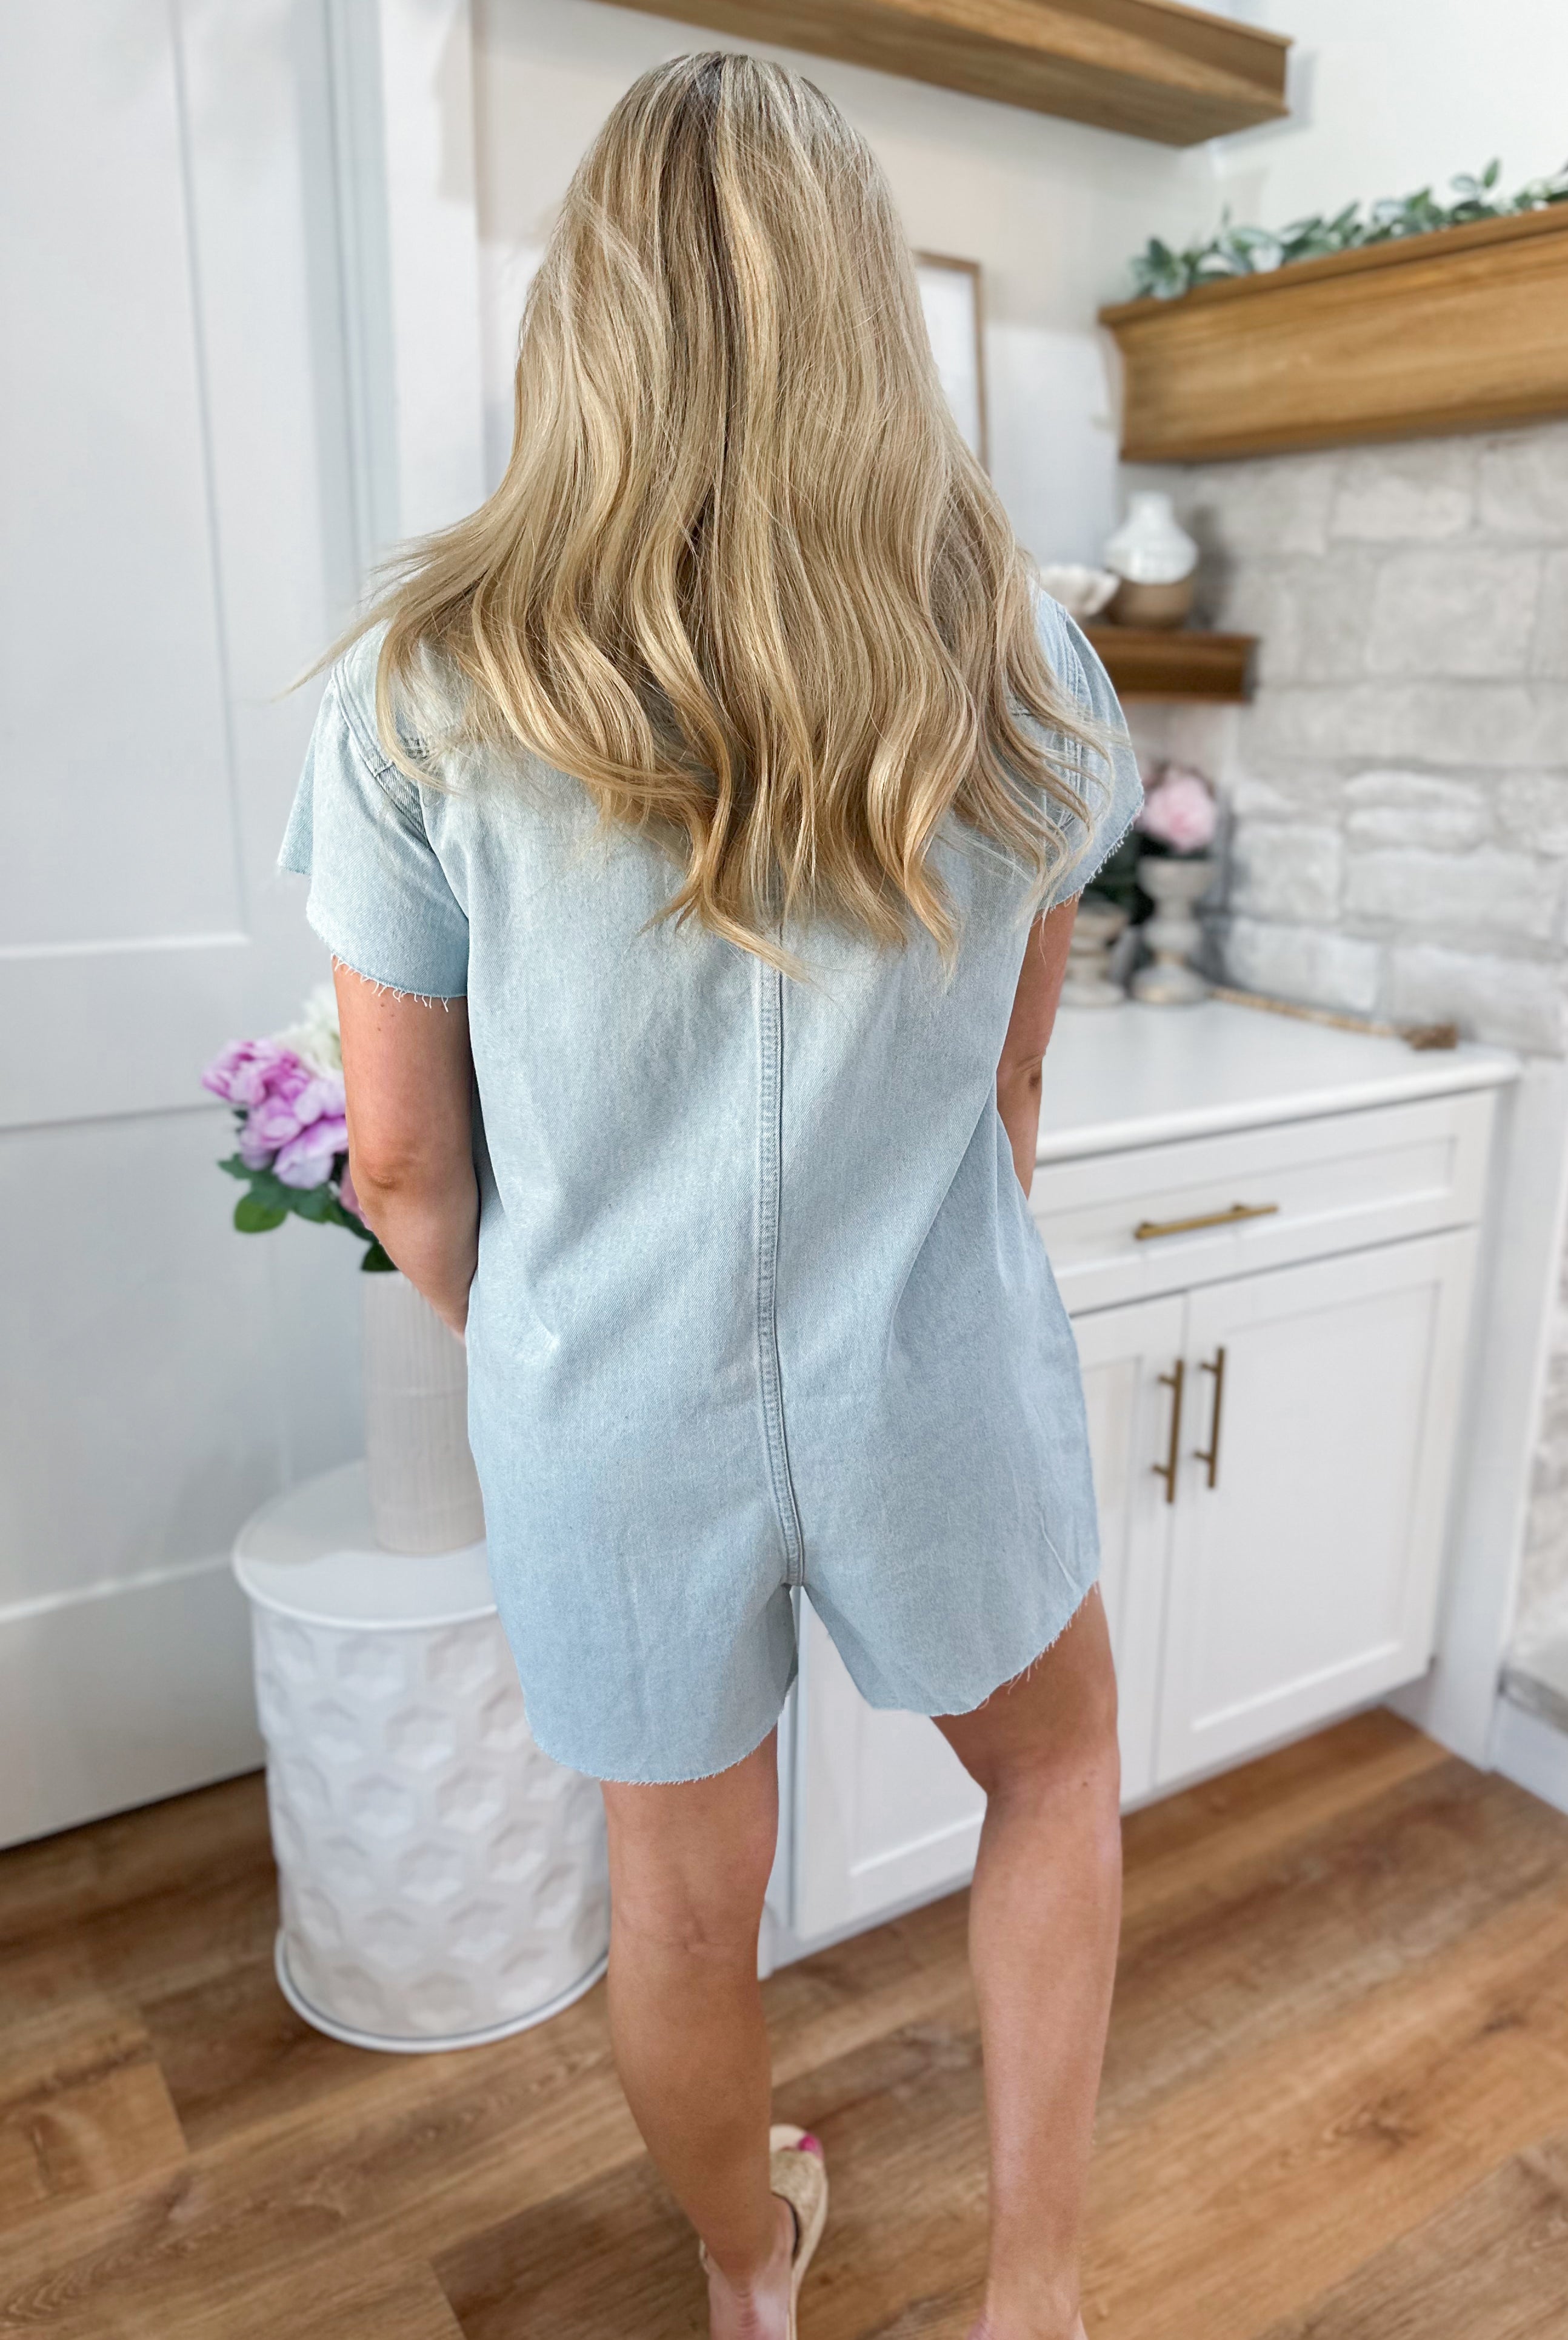 Medley Cotten Denim Romper With Distressed Detail - Be You Boutique